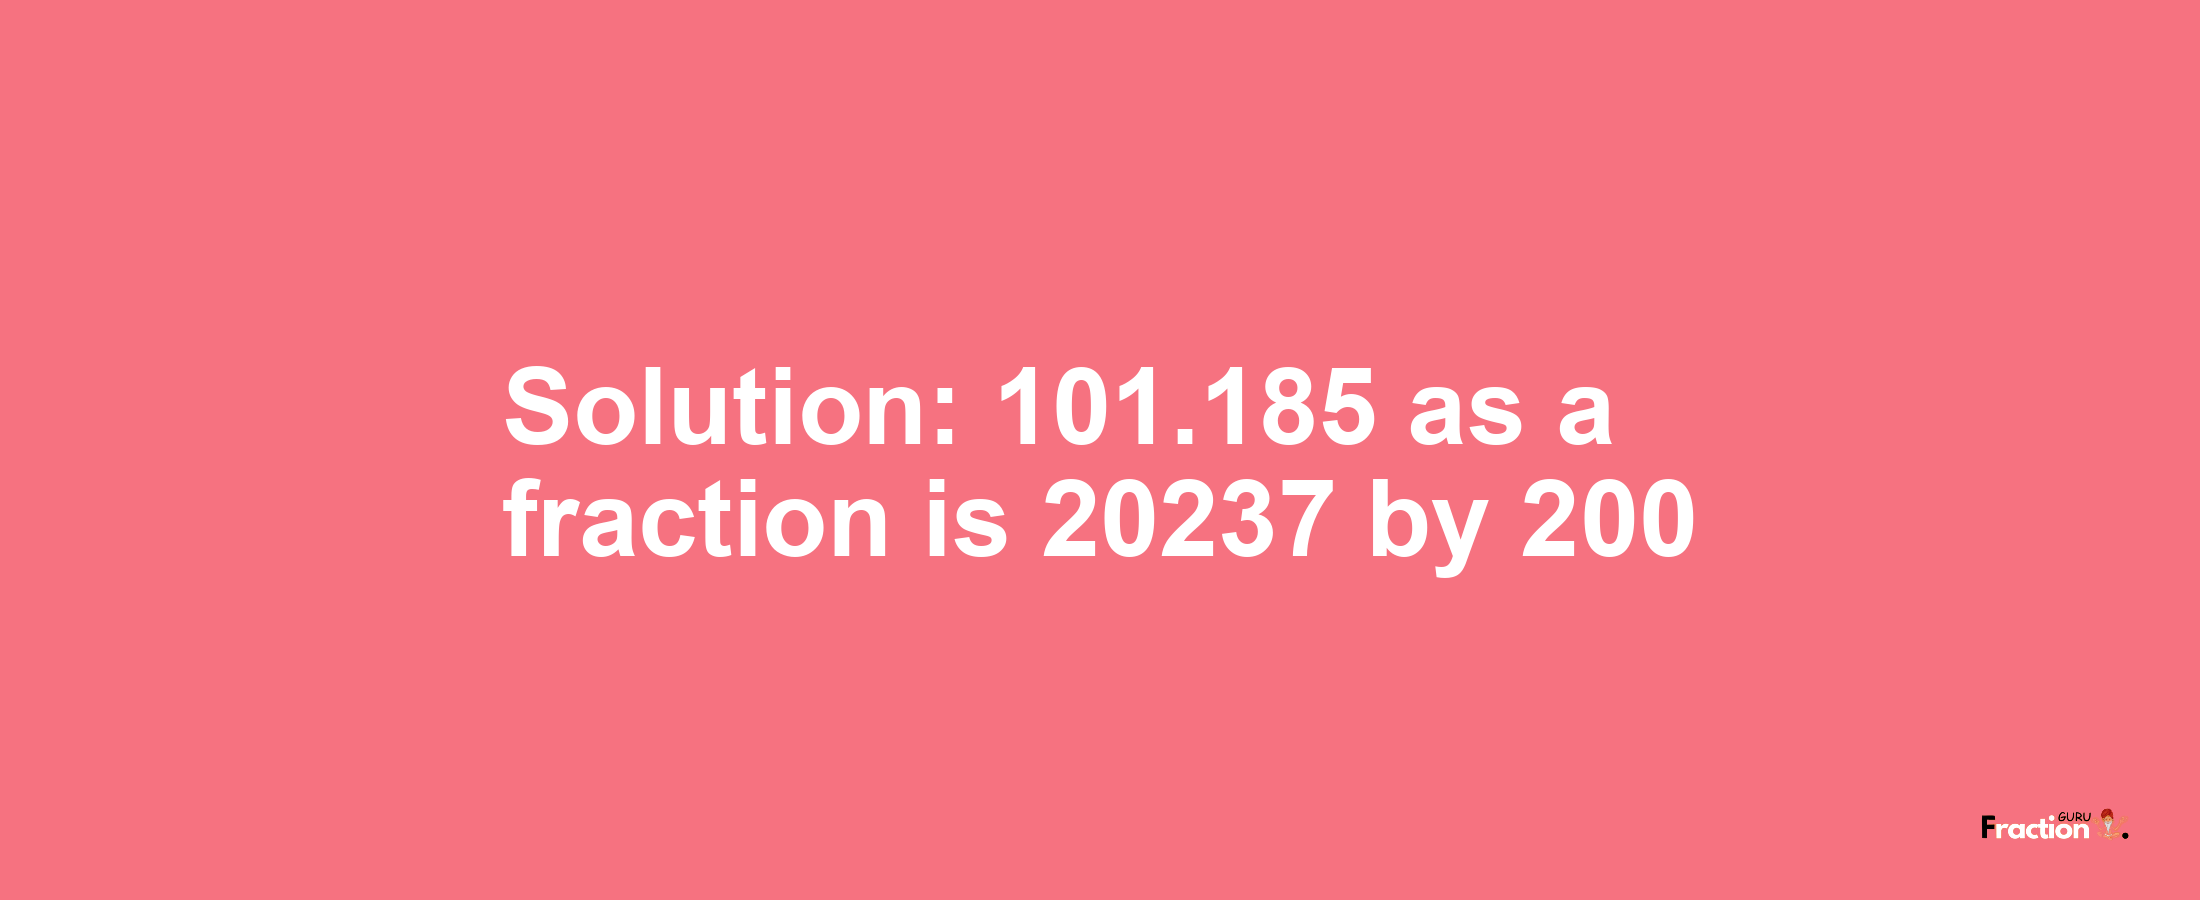 Solution:101.185 as a fraction is 20237/200